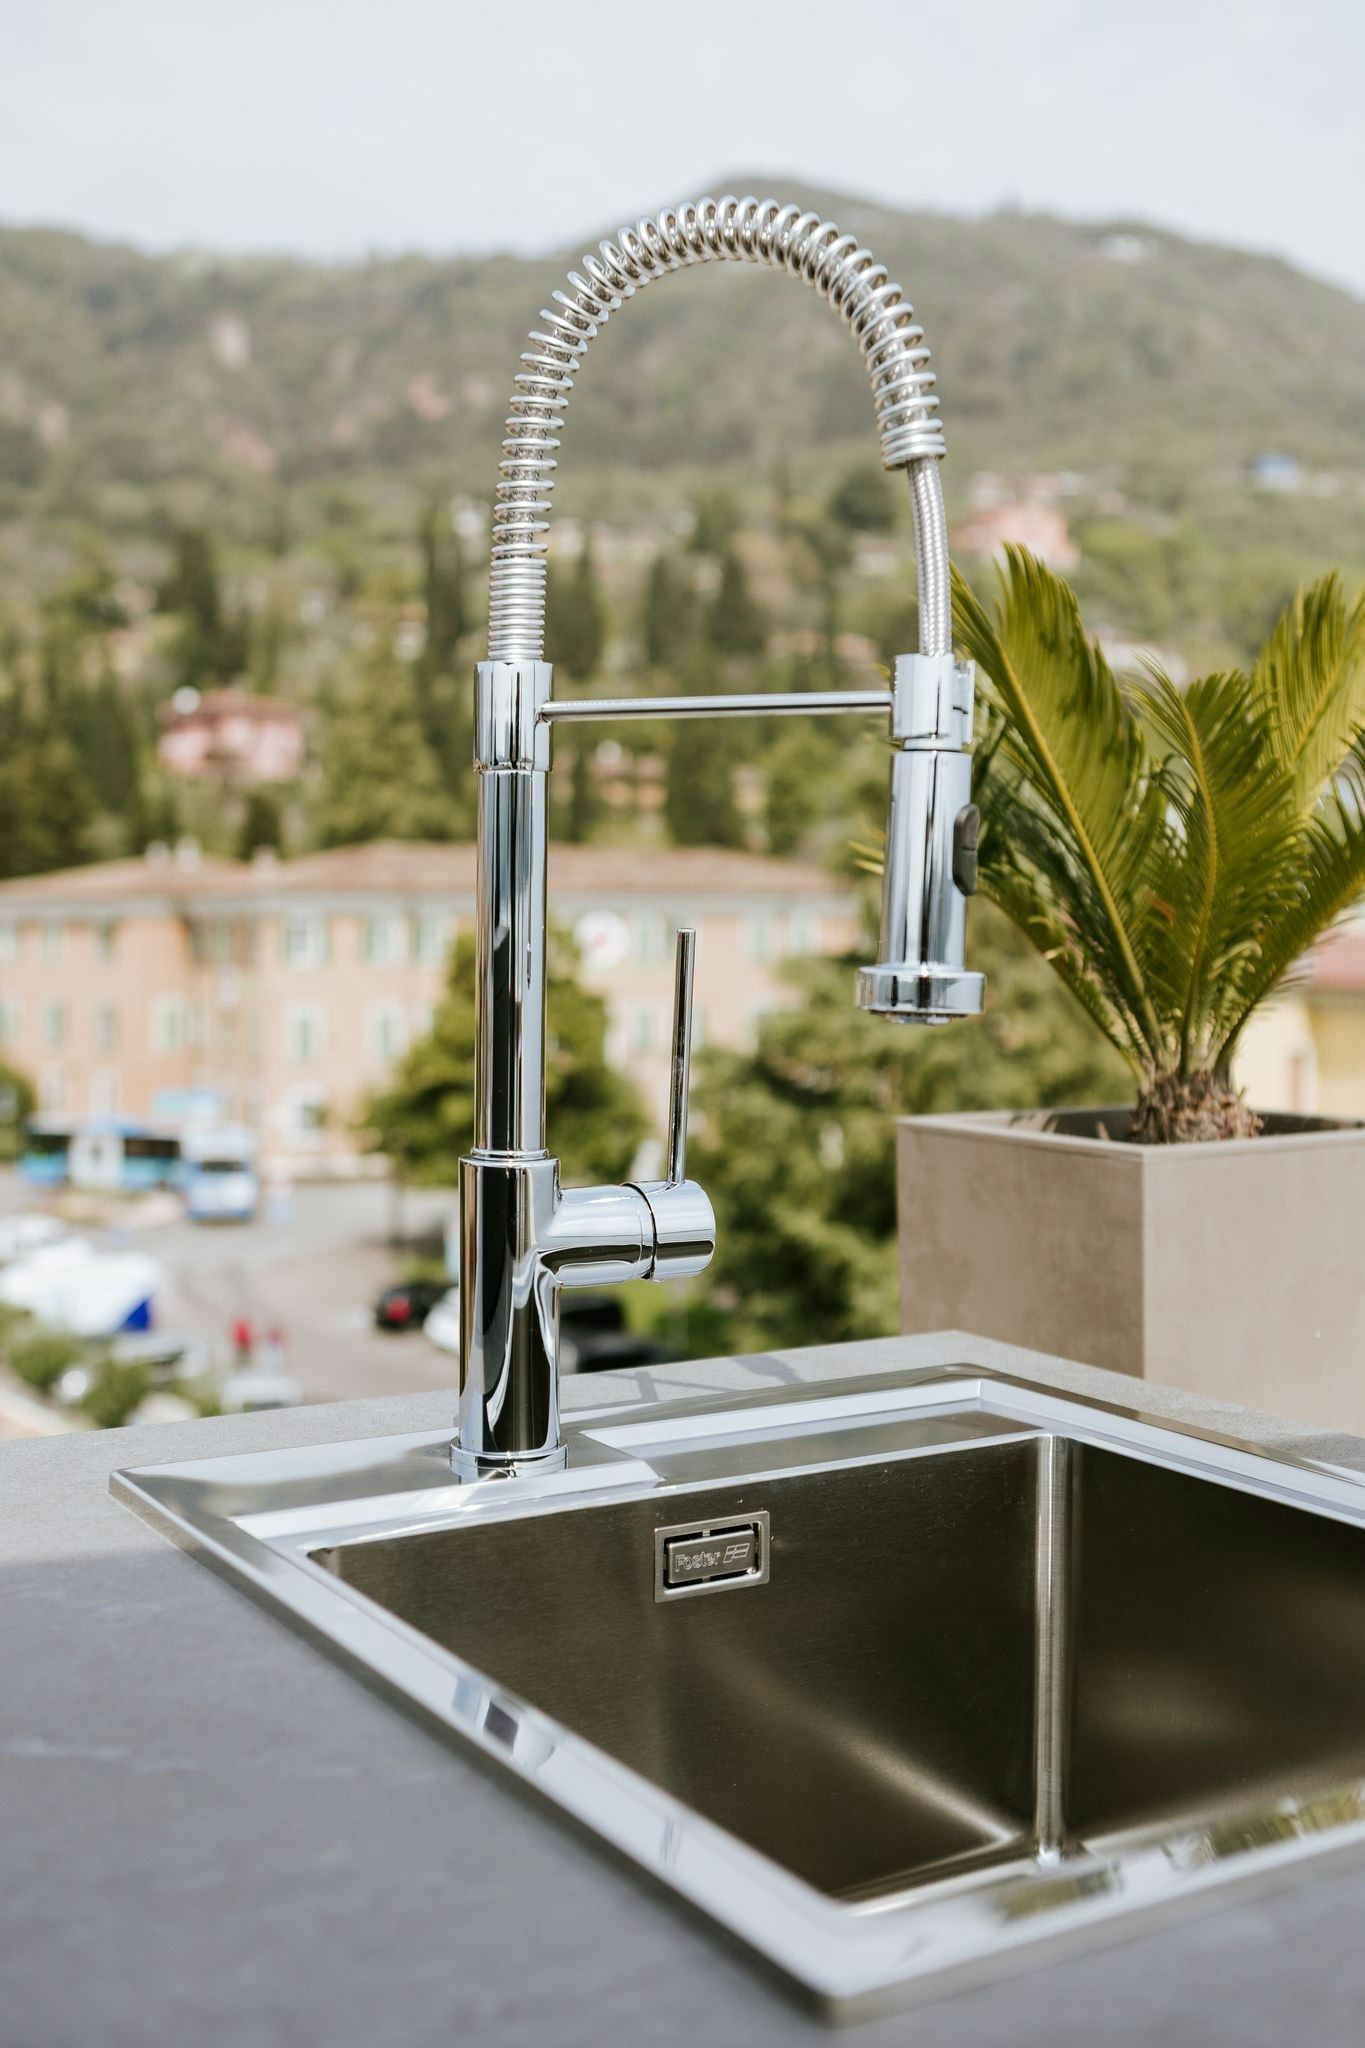 An outdoor kitchen sink with a sleek design and modern fixtures. The sink is nestled within a countertop and surrounded by the natural beauty of the outdoors. It exudes functionality and style, providing a convenient space for food preparation and clean-up in an outdoor culinary setting